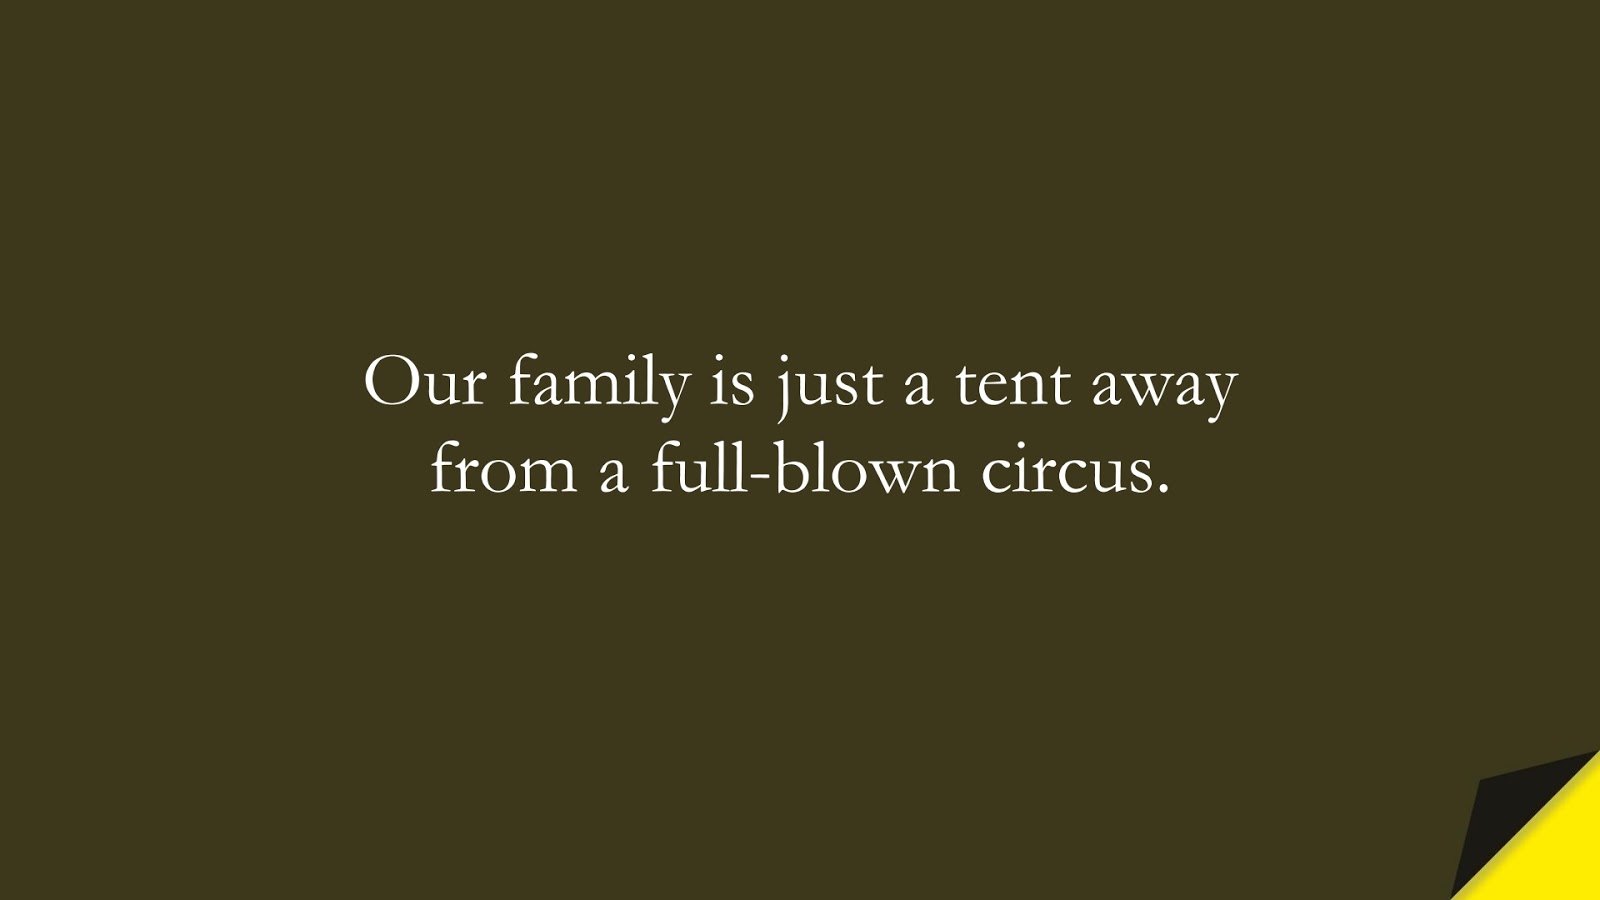 Our family is just a tent away from a full-blown circus.FALSE